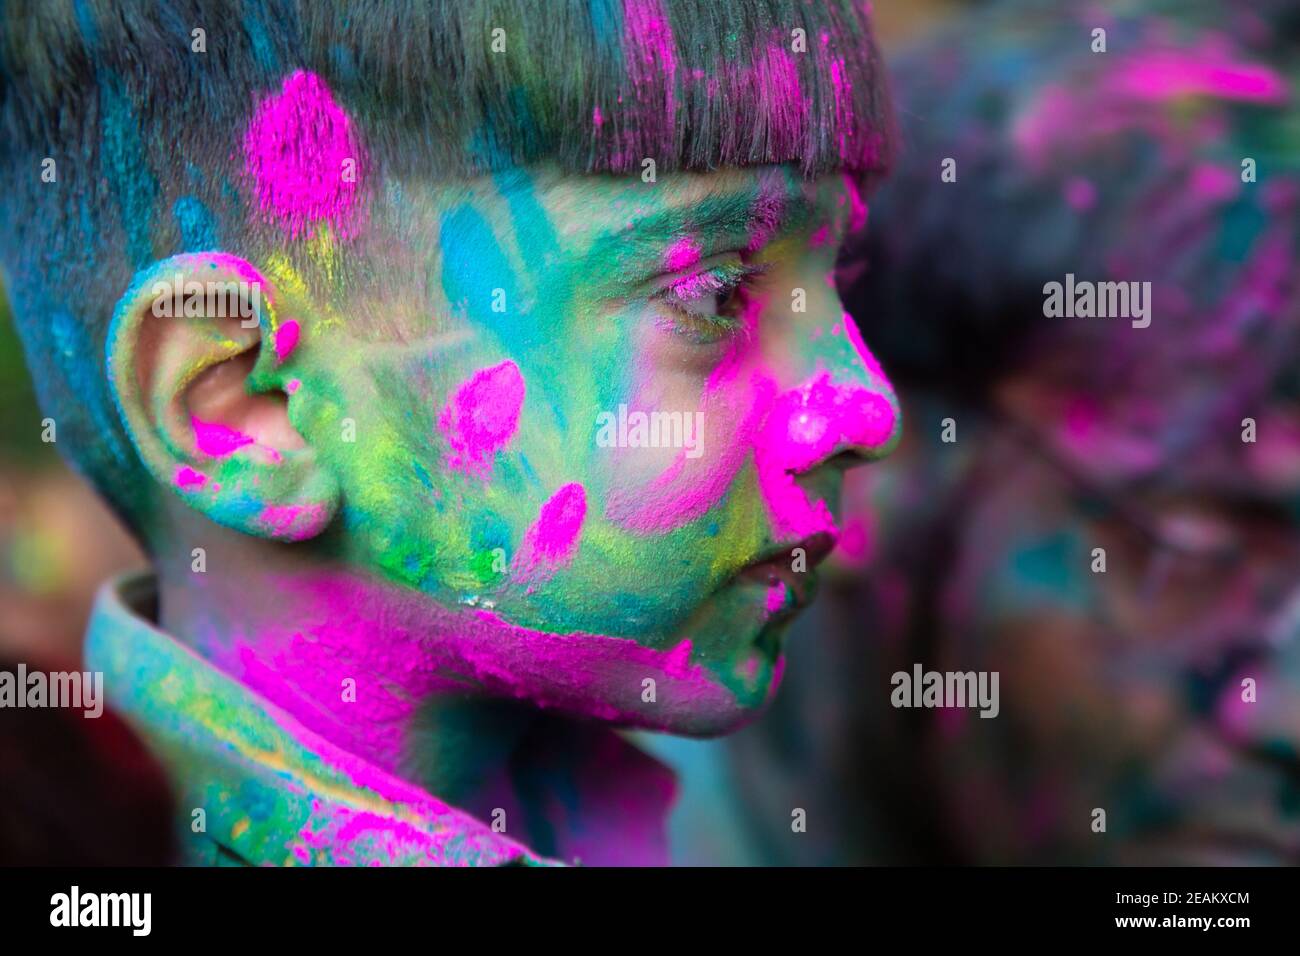 Jodhpur, rajastha, india - March 20, 2020: Portrait of cute little indian kid celebrating holi festival, closeup of face covered with colored powder. Stock Photo